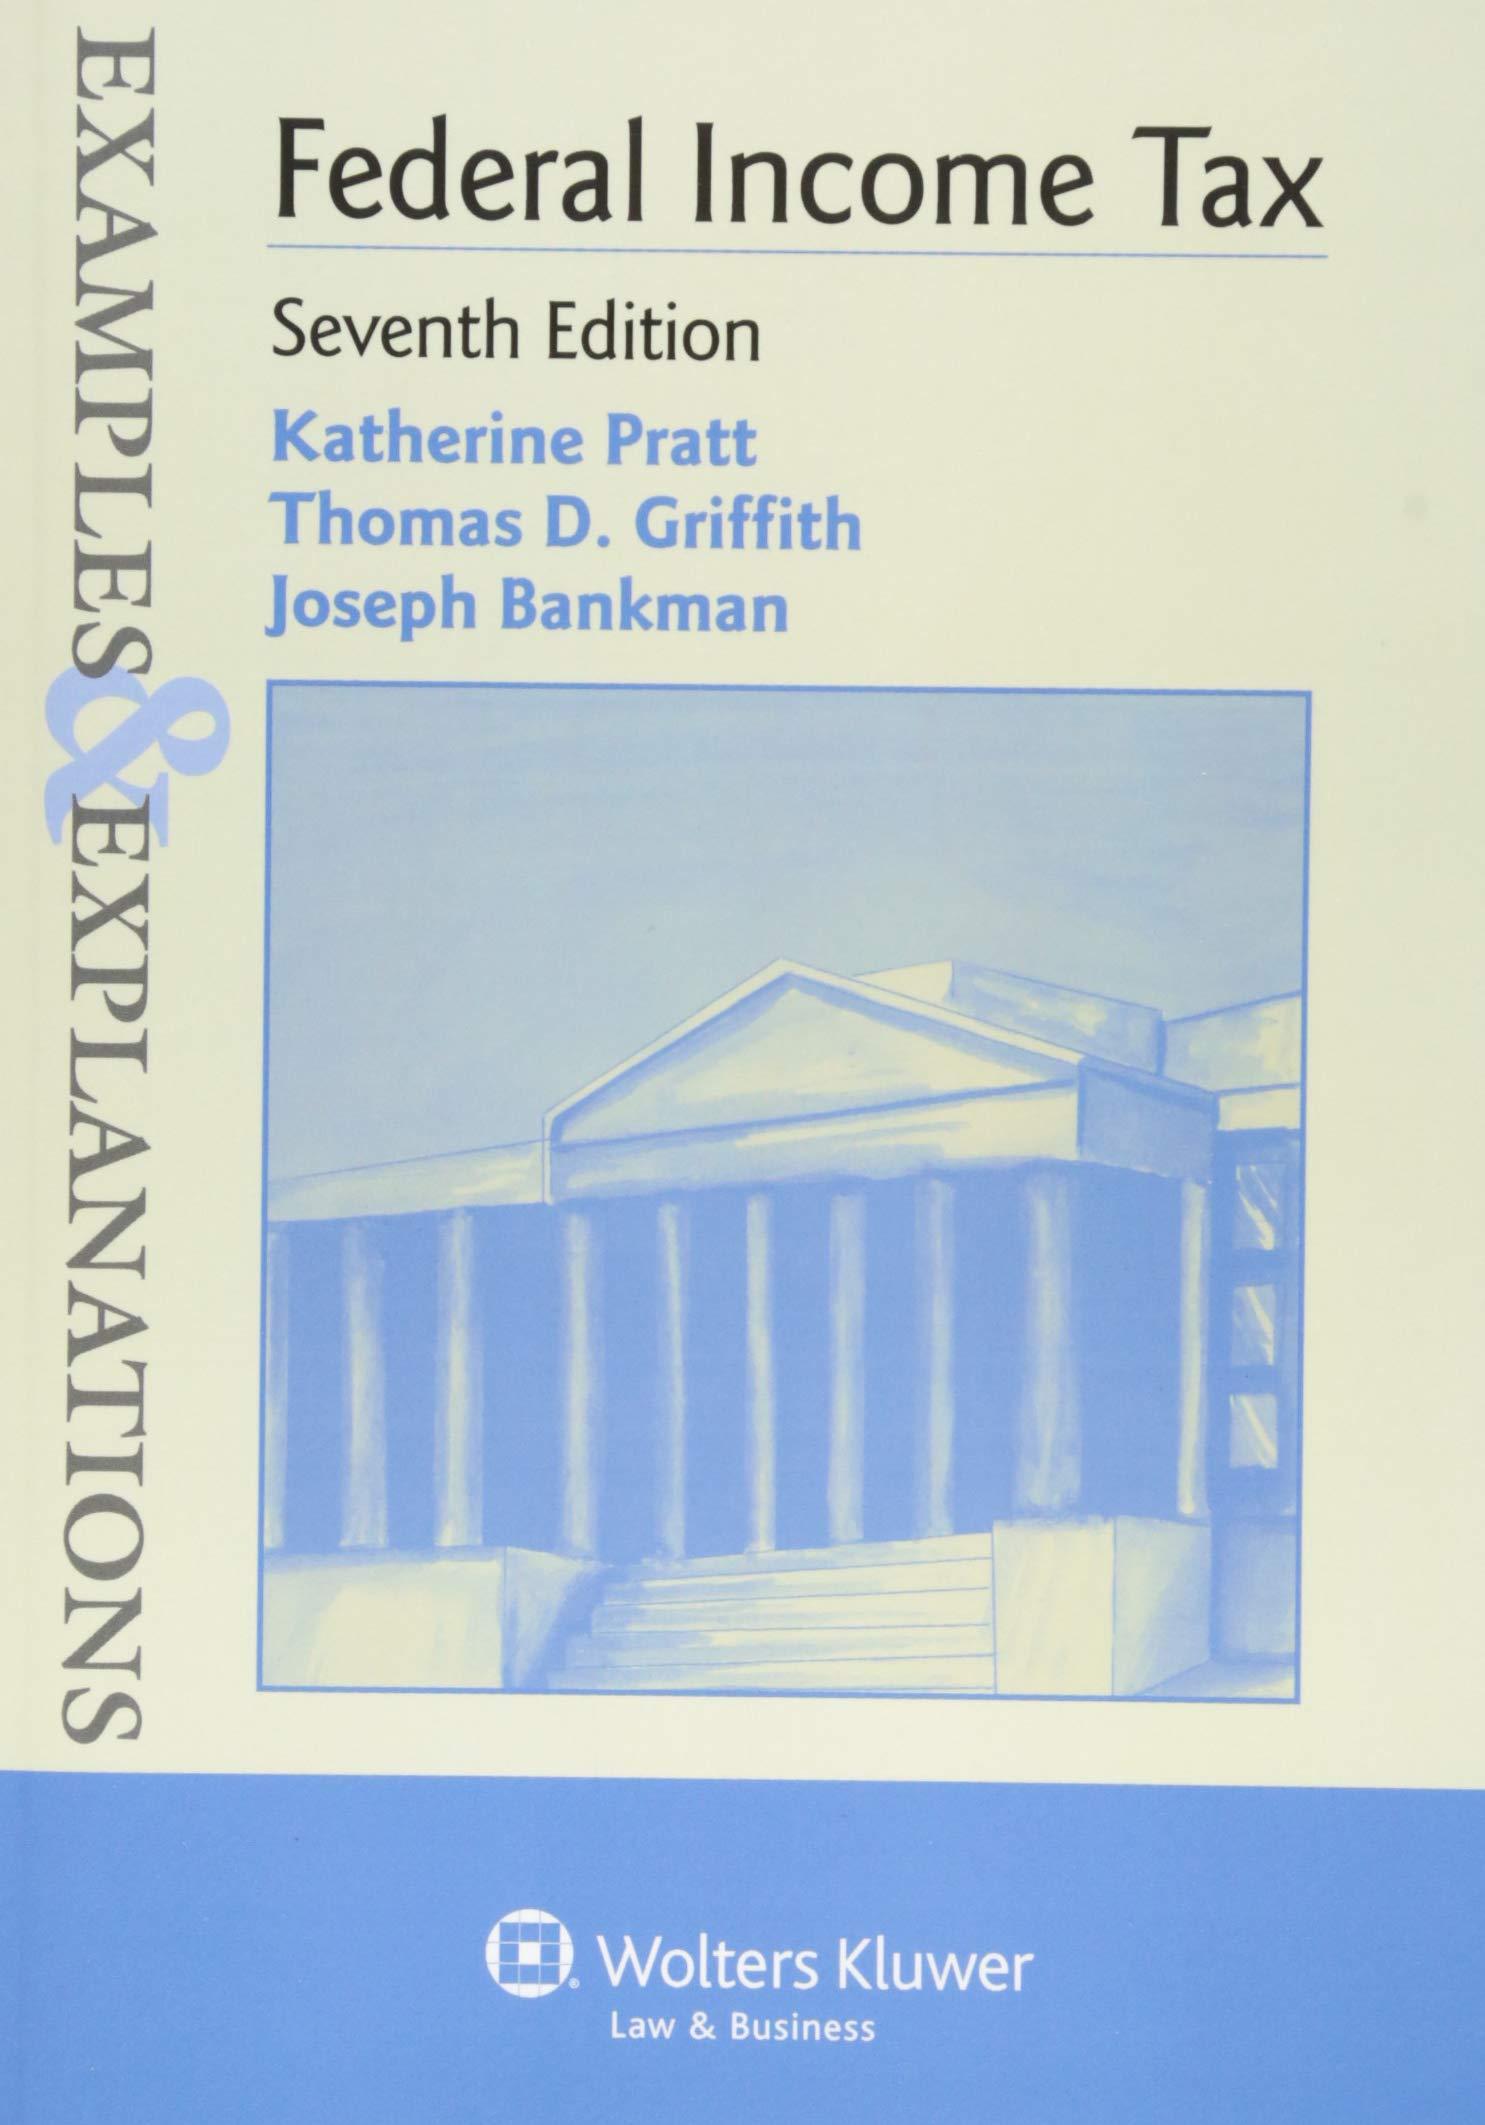 federal income tax examples and explanations 7th edition katherine pratt, thomas d. griffith, joseph bankman